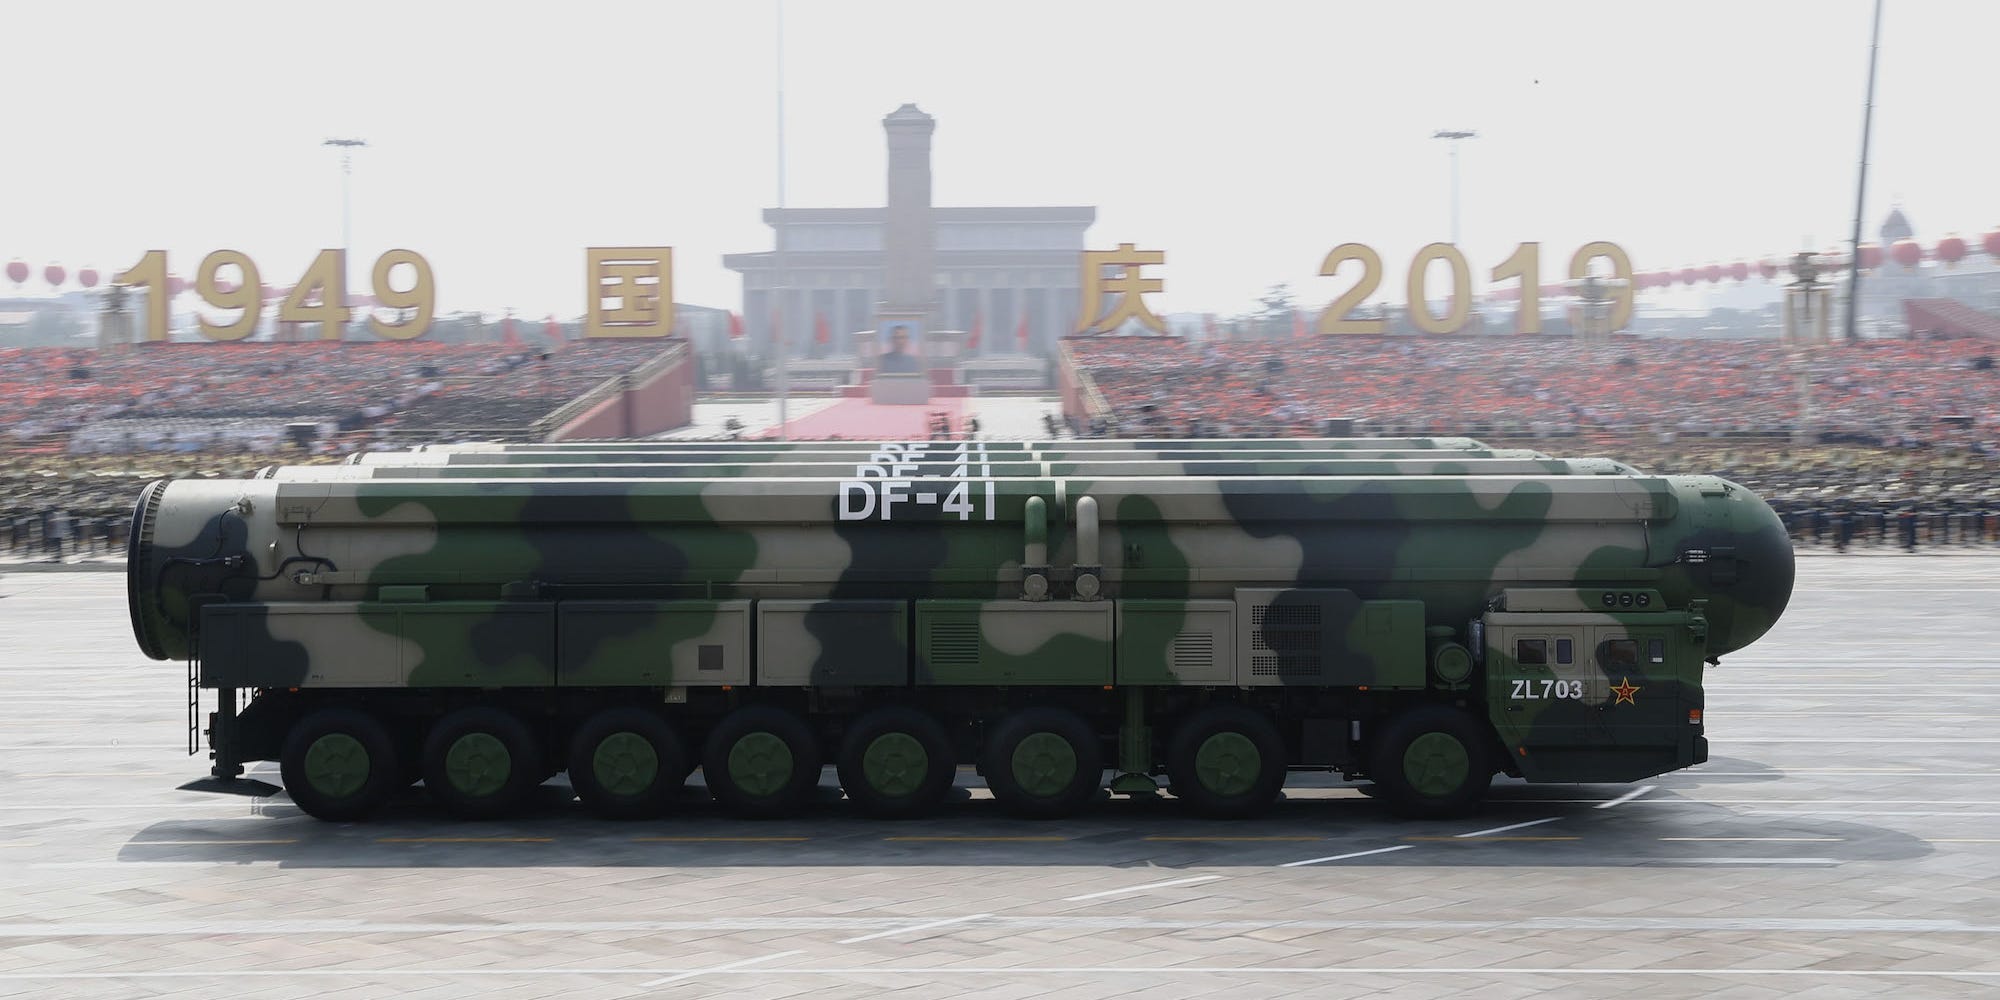 Dongfeng-41 DF-41 ICBM missiles in Beijing